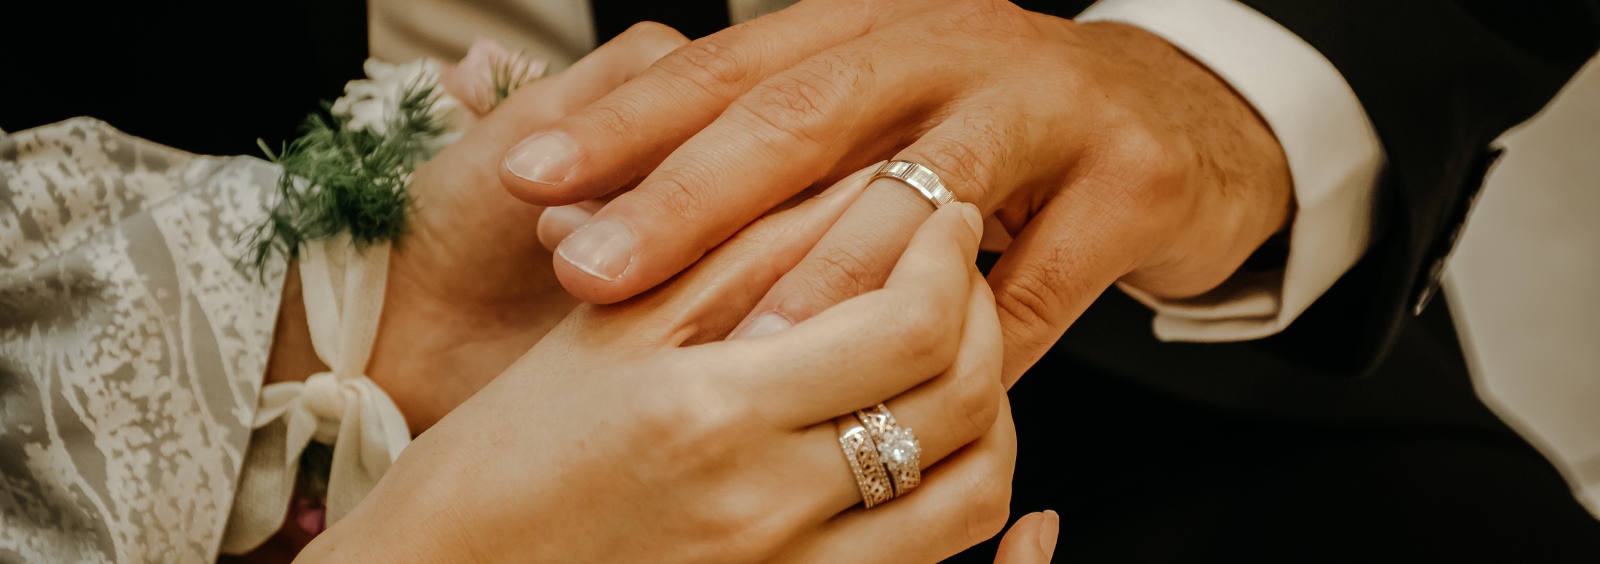 The hands of a husband and wife on their wedding day.